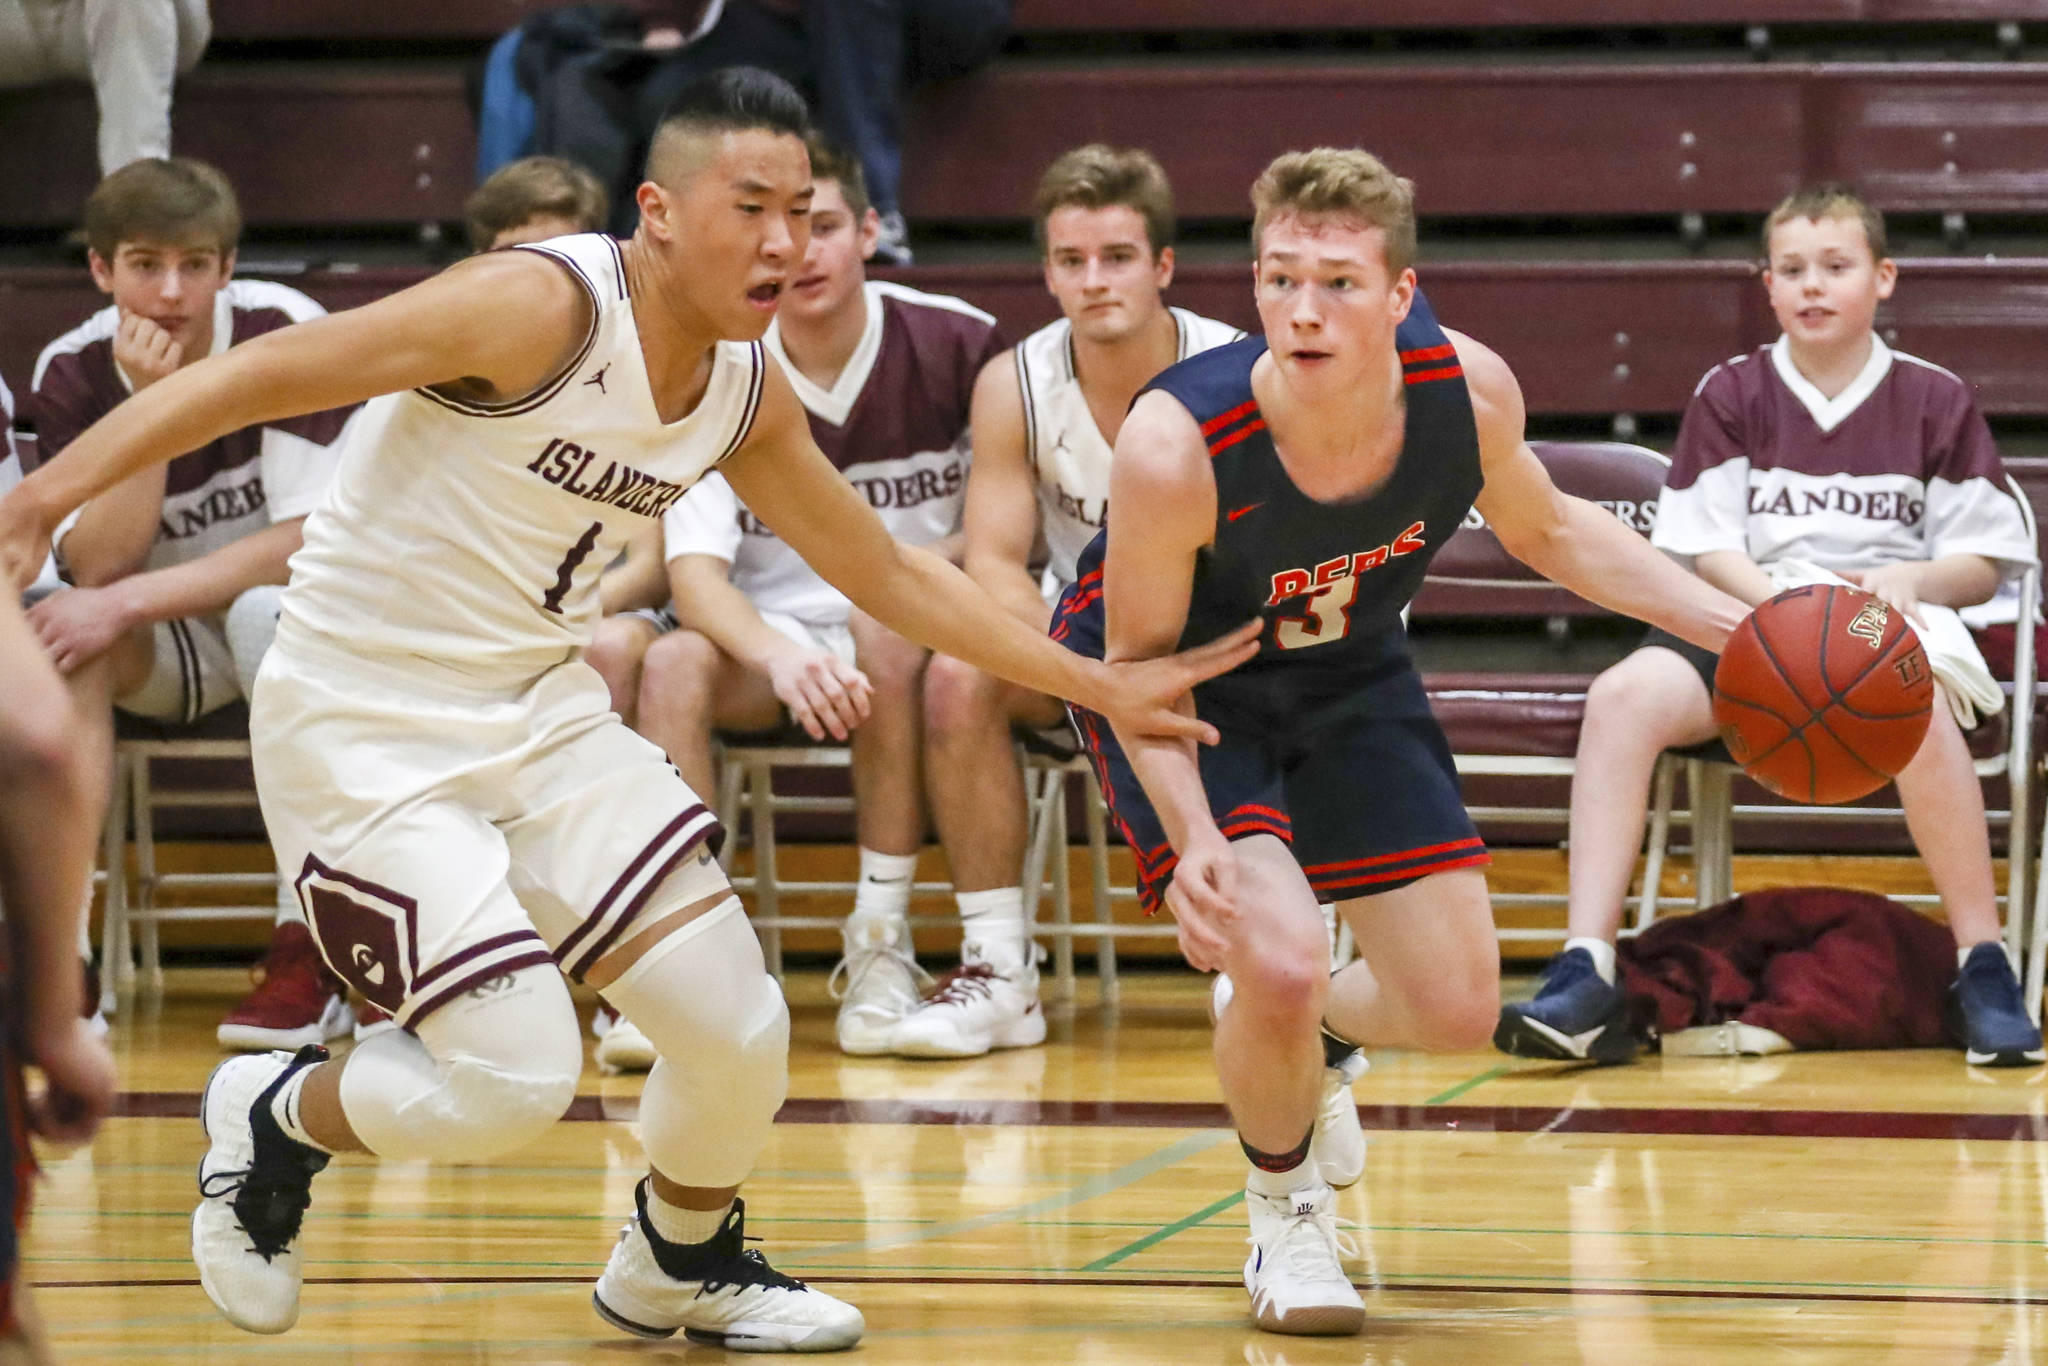 Mercer Island senior guard Will Lee, left, pressures Juanita junior Cooper Mcleod during the first half of play. Lee finished with 14 points against the Rebels. Photo courtesy of Rick Edelman/Rick Edelman Photography